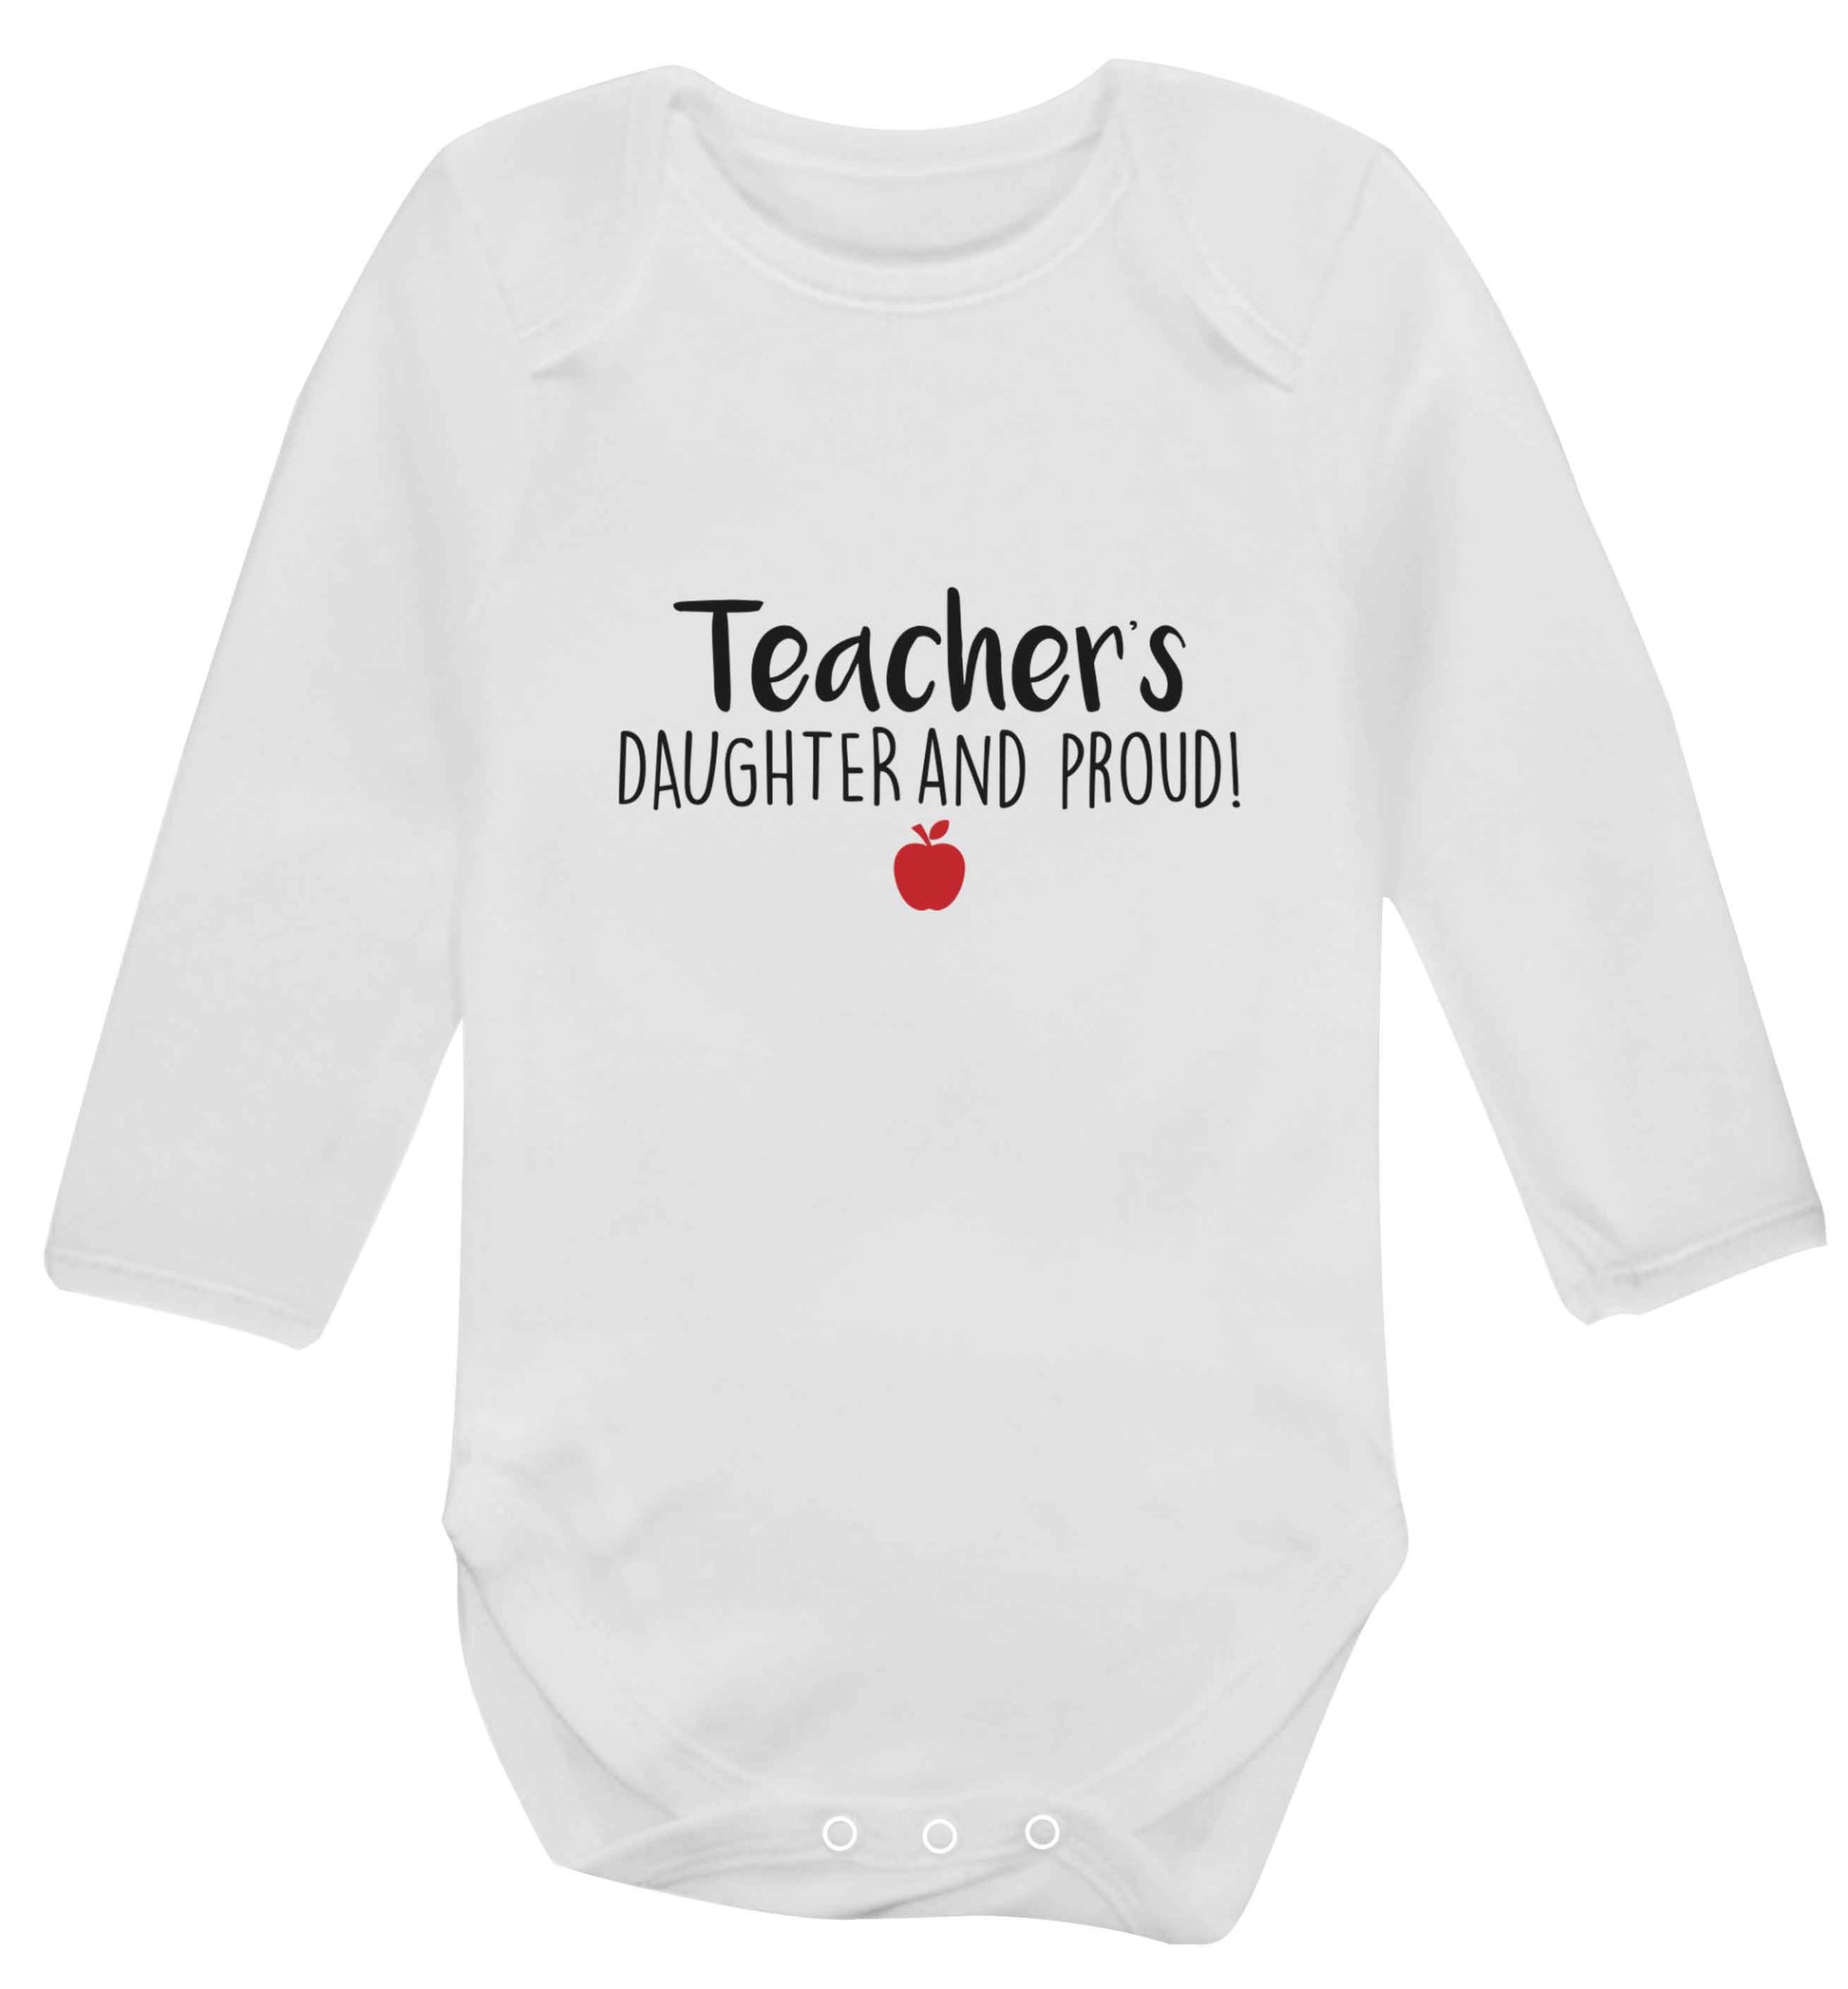 Teachers daughter and proud baby vest long sleeved white 6-12 months